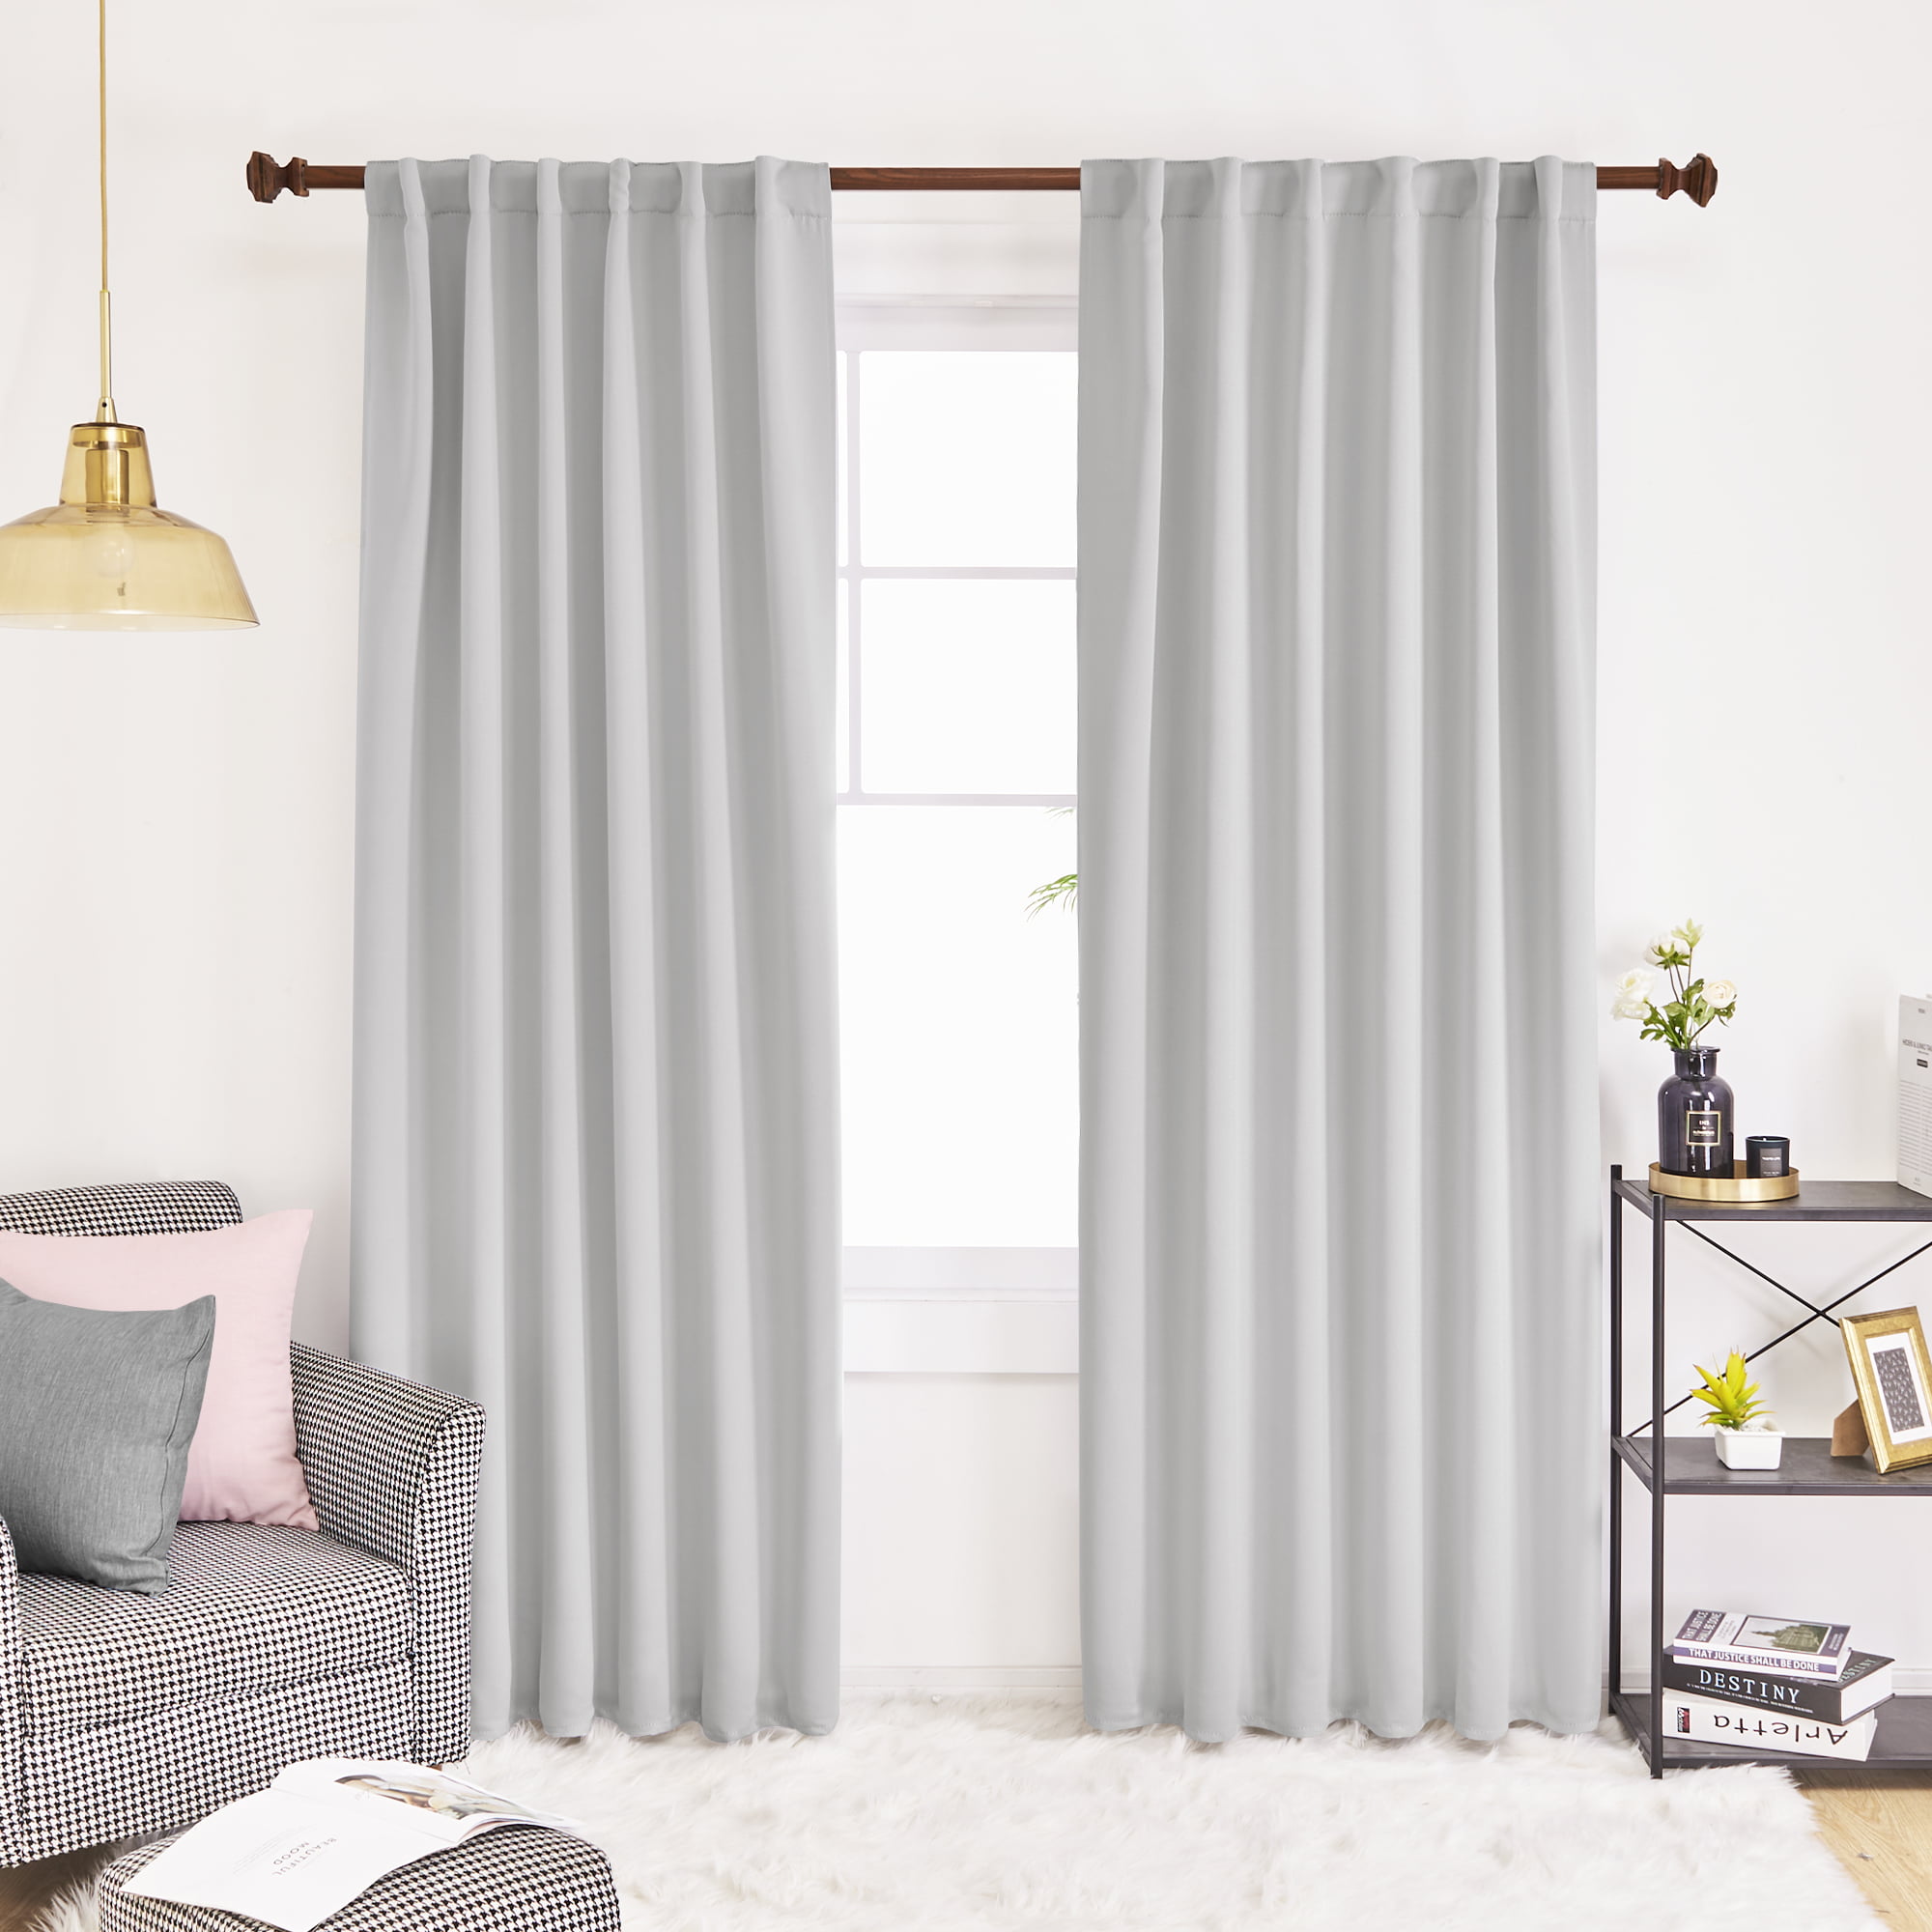 Details about   Thicken Blackout Curtains Solid Thermal Window Drapes 2 Panel 